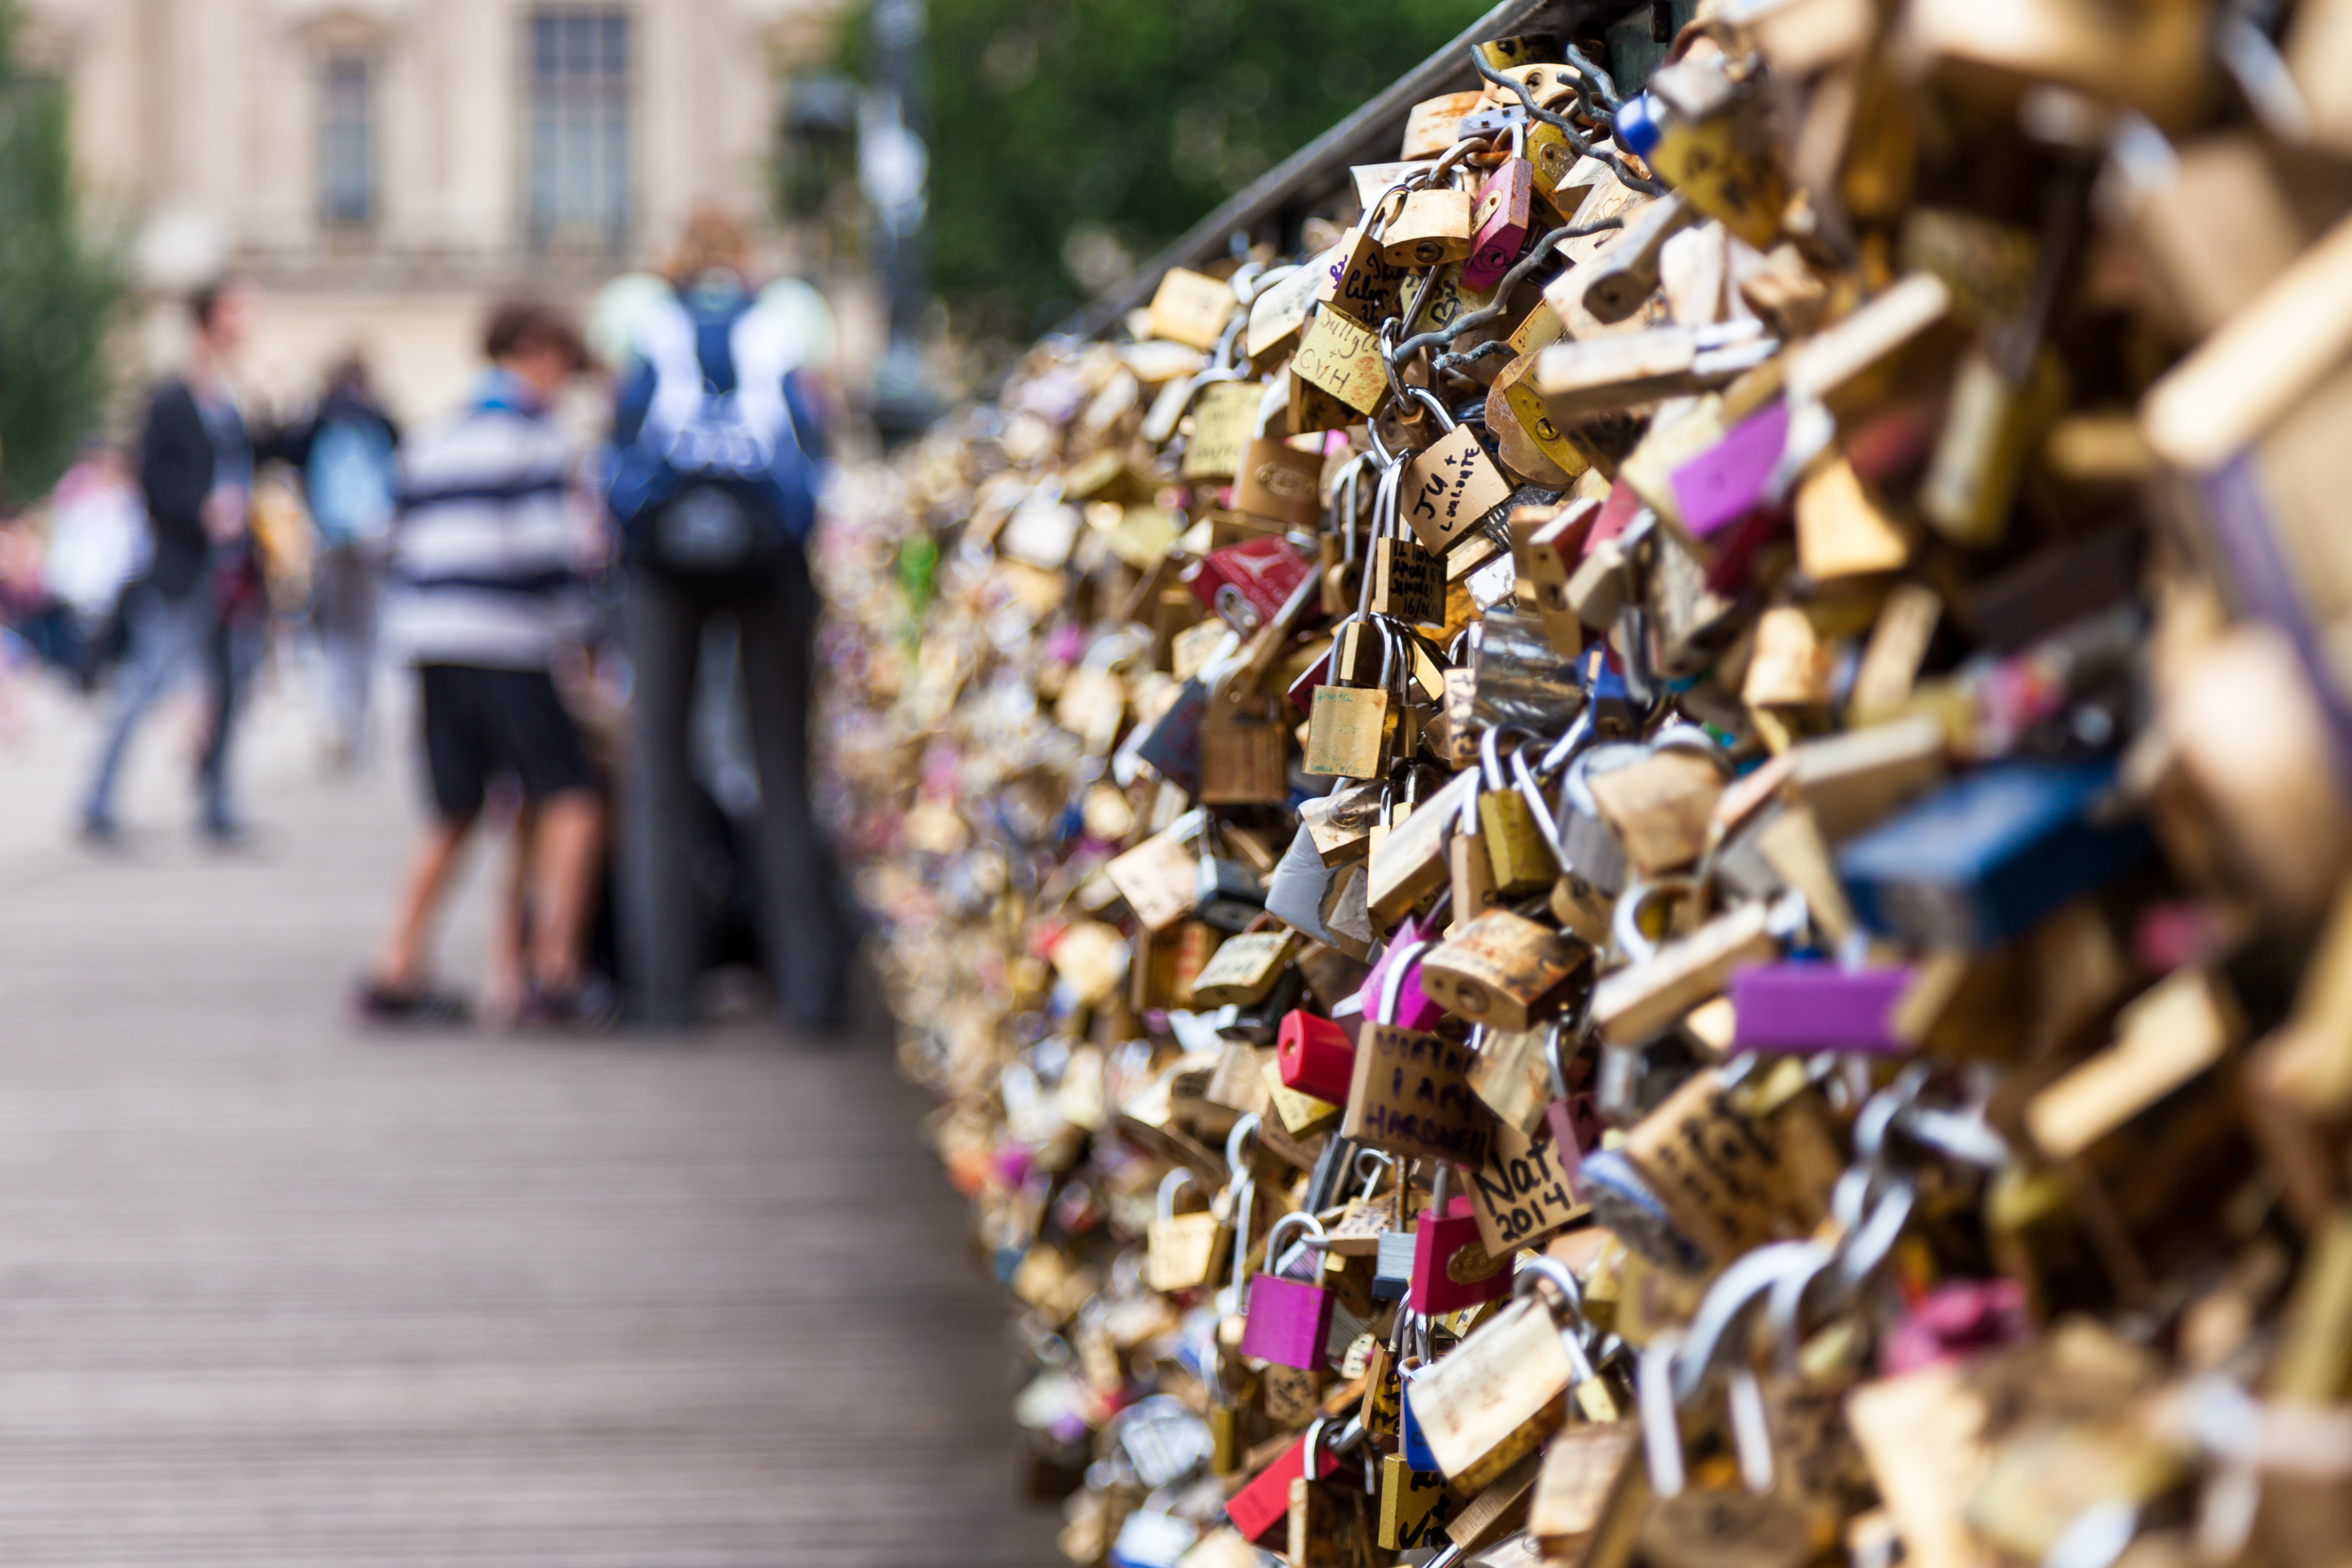 Business students in Paris: Locking up some love on Pont des Arts